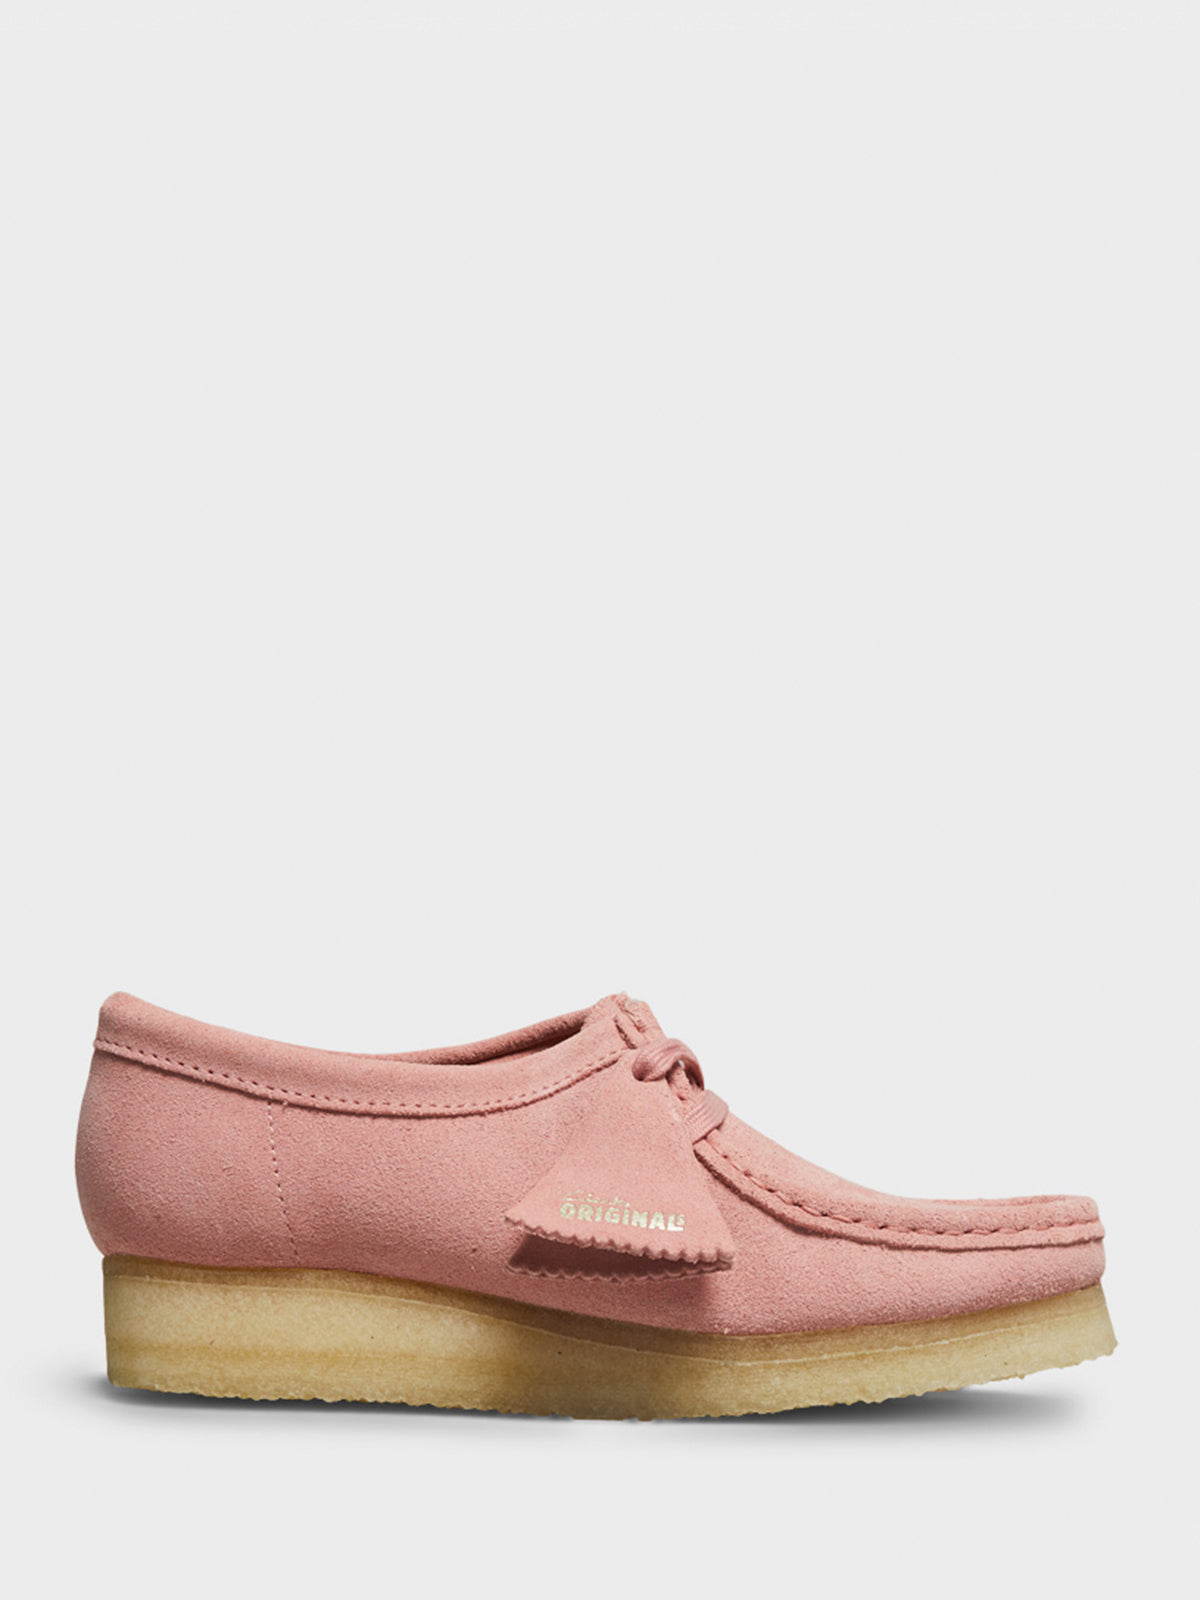 Clarks - Women's Wallabee Shoes in Blush Pink Suede